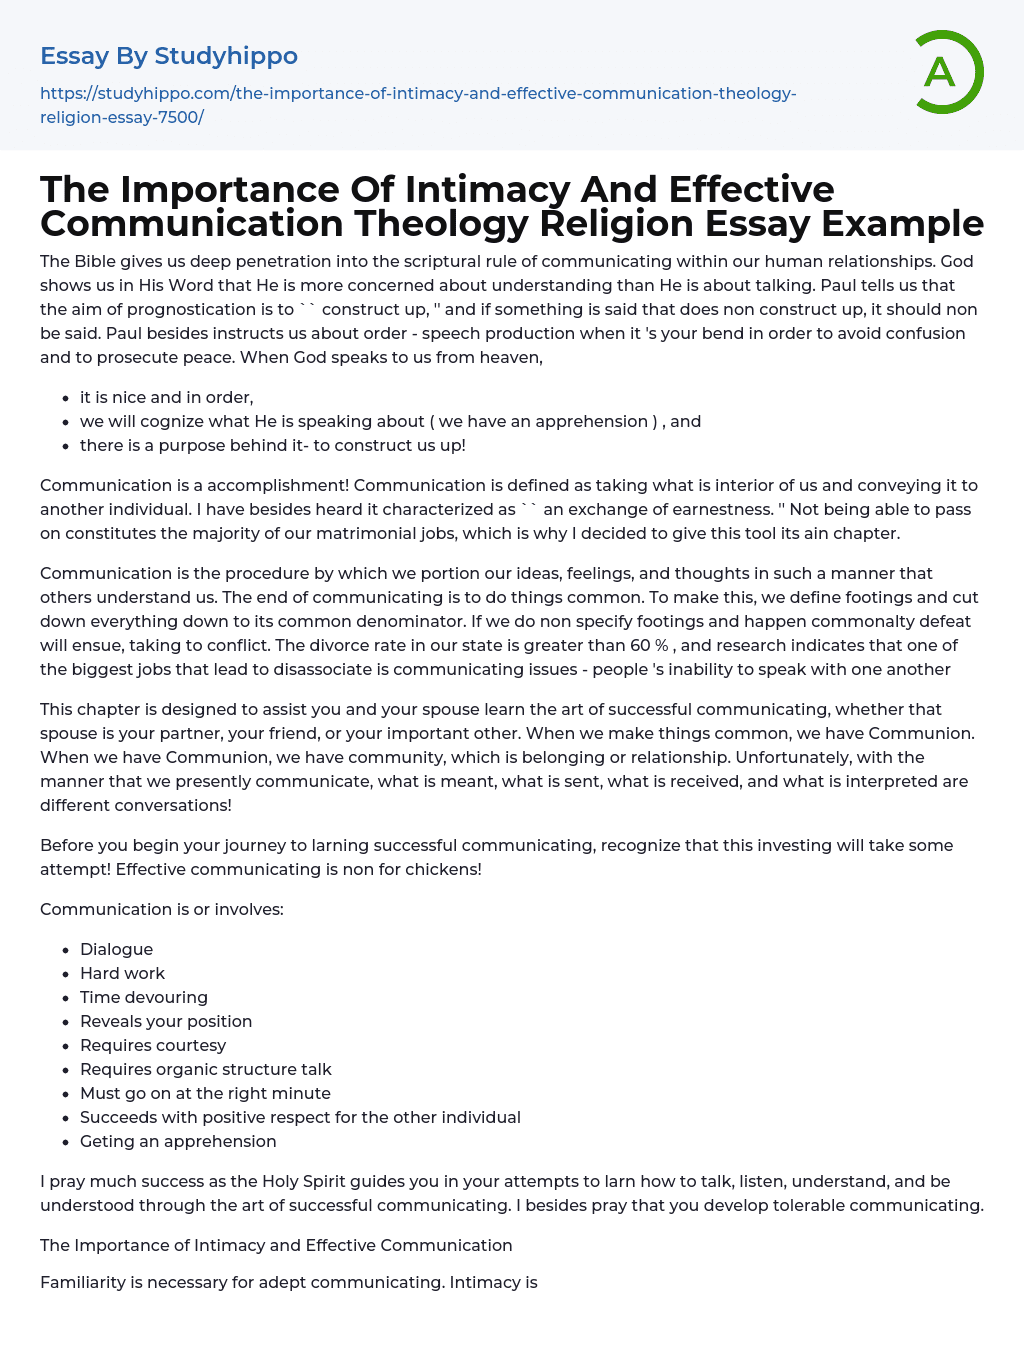 The Importance Of Intimacy And Effective Communication Theology Religion Essay Example